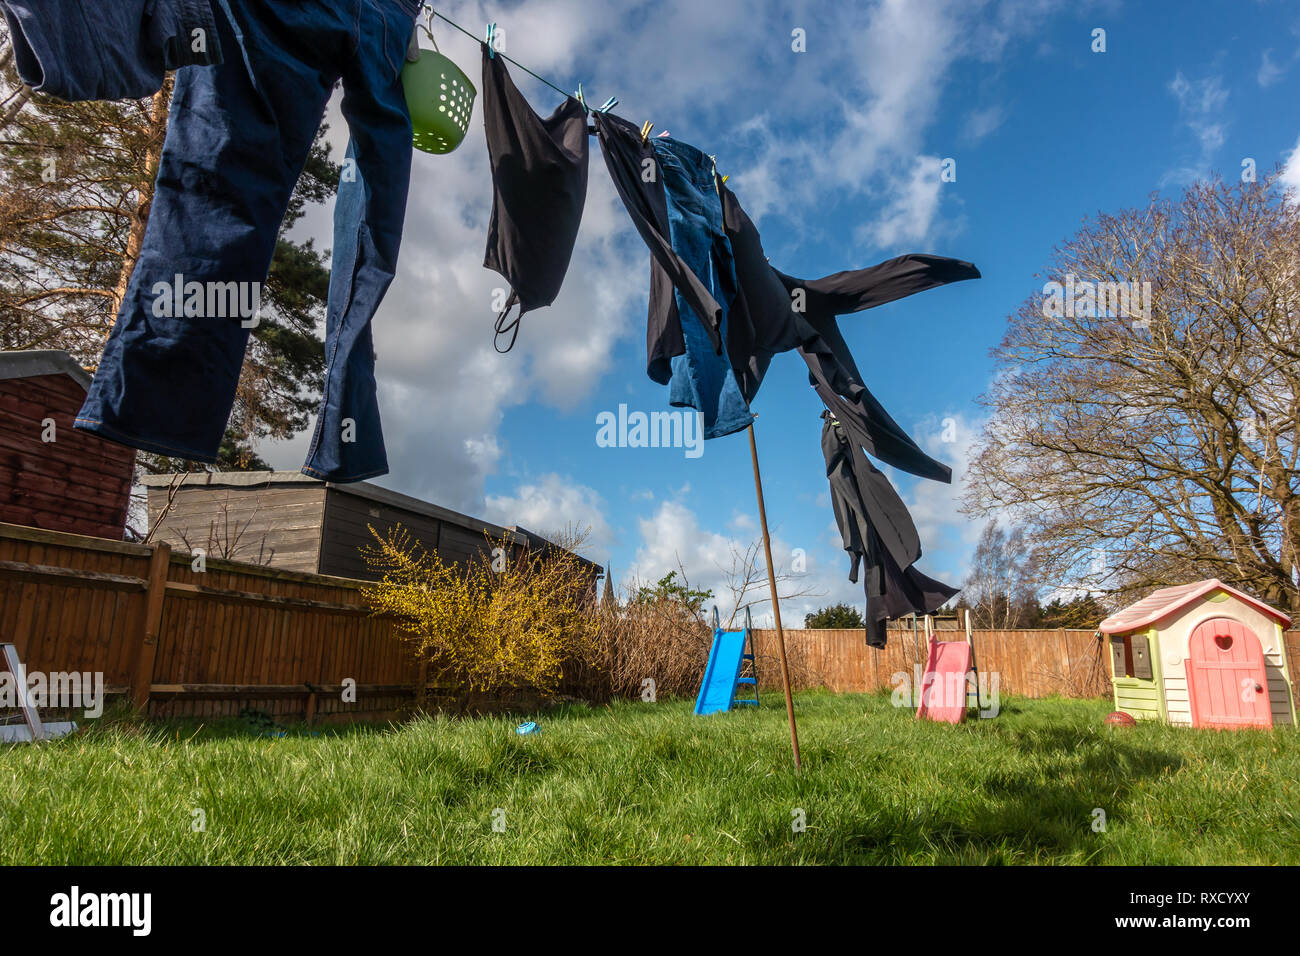 Clothes drying outside on a washing line on a windy day with broken clouds and a blue sky Stock Photo